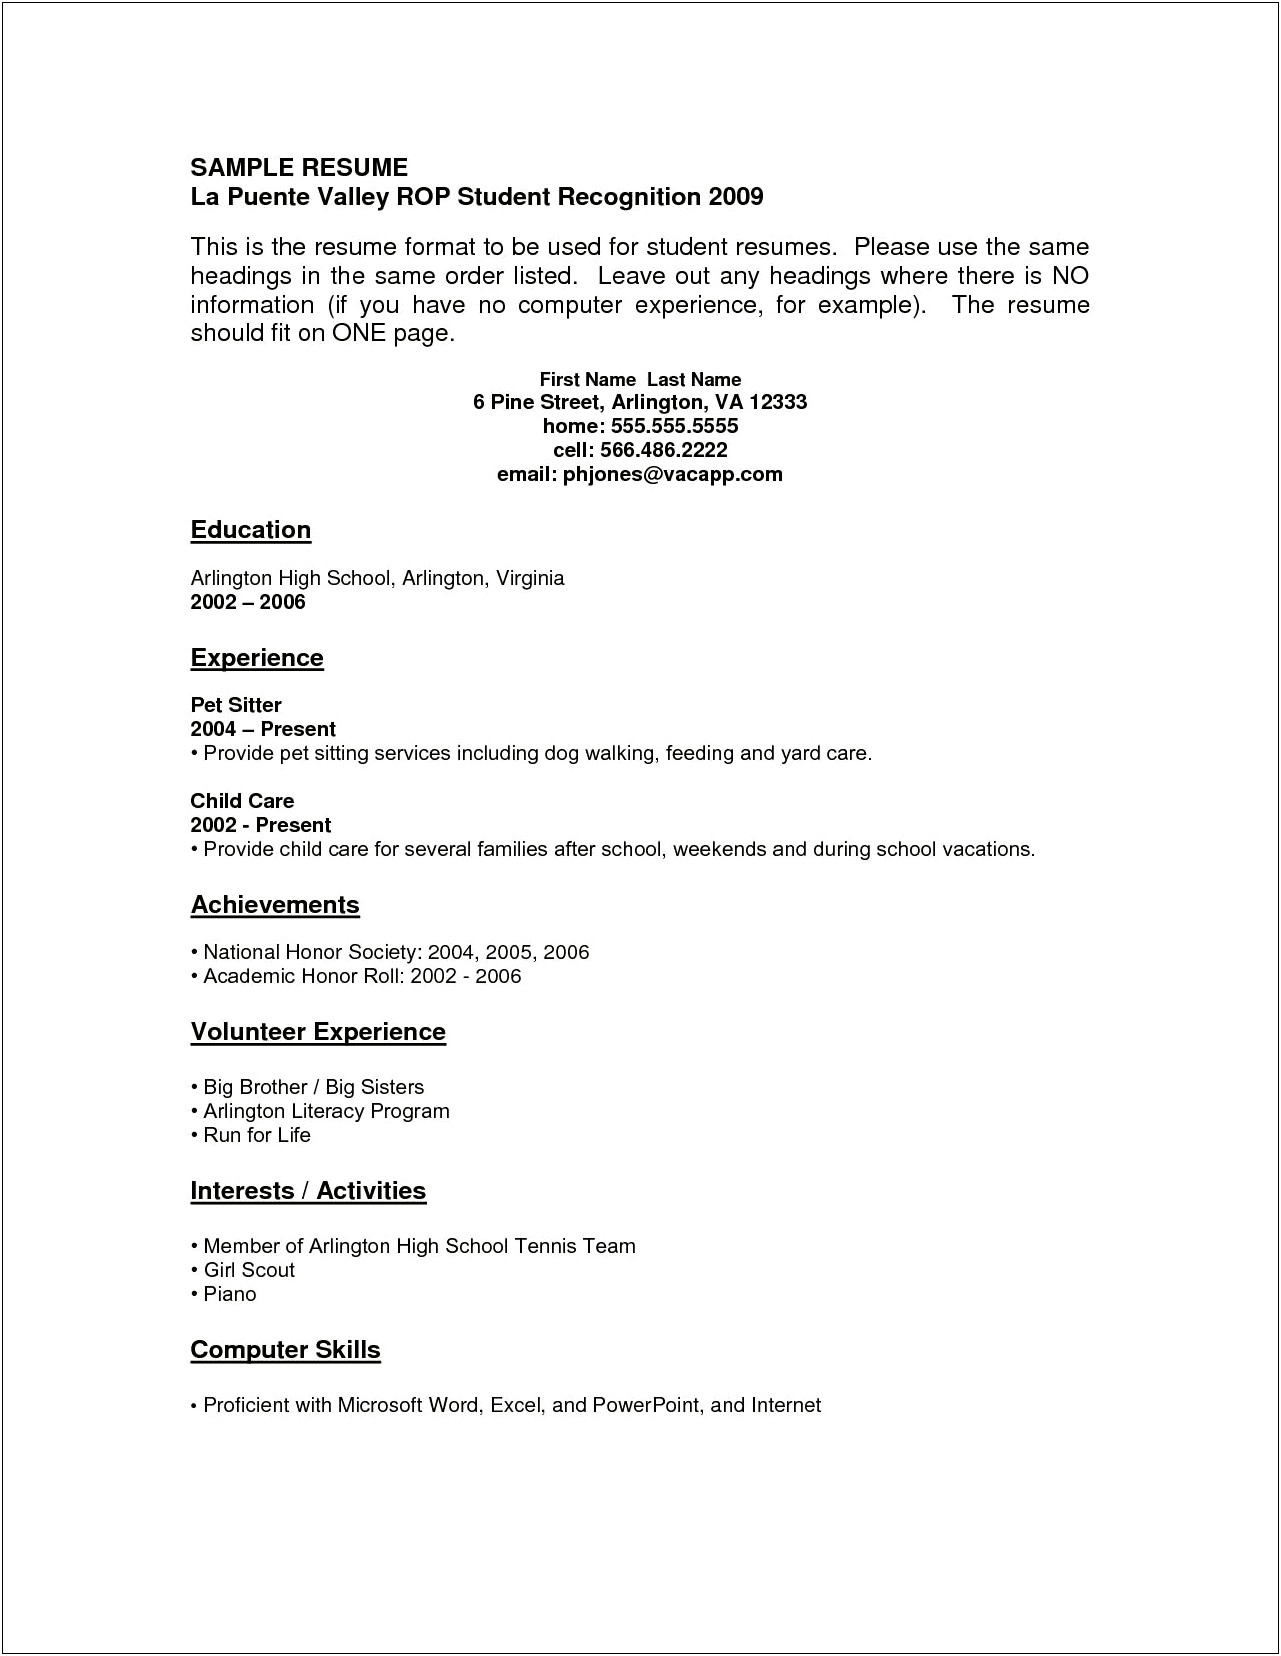 Resume For Highschool Graduates Little Experience